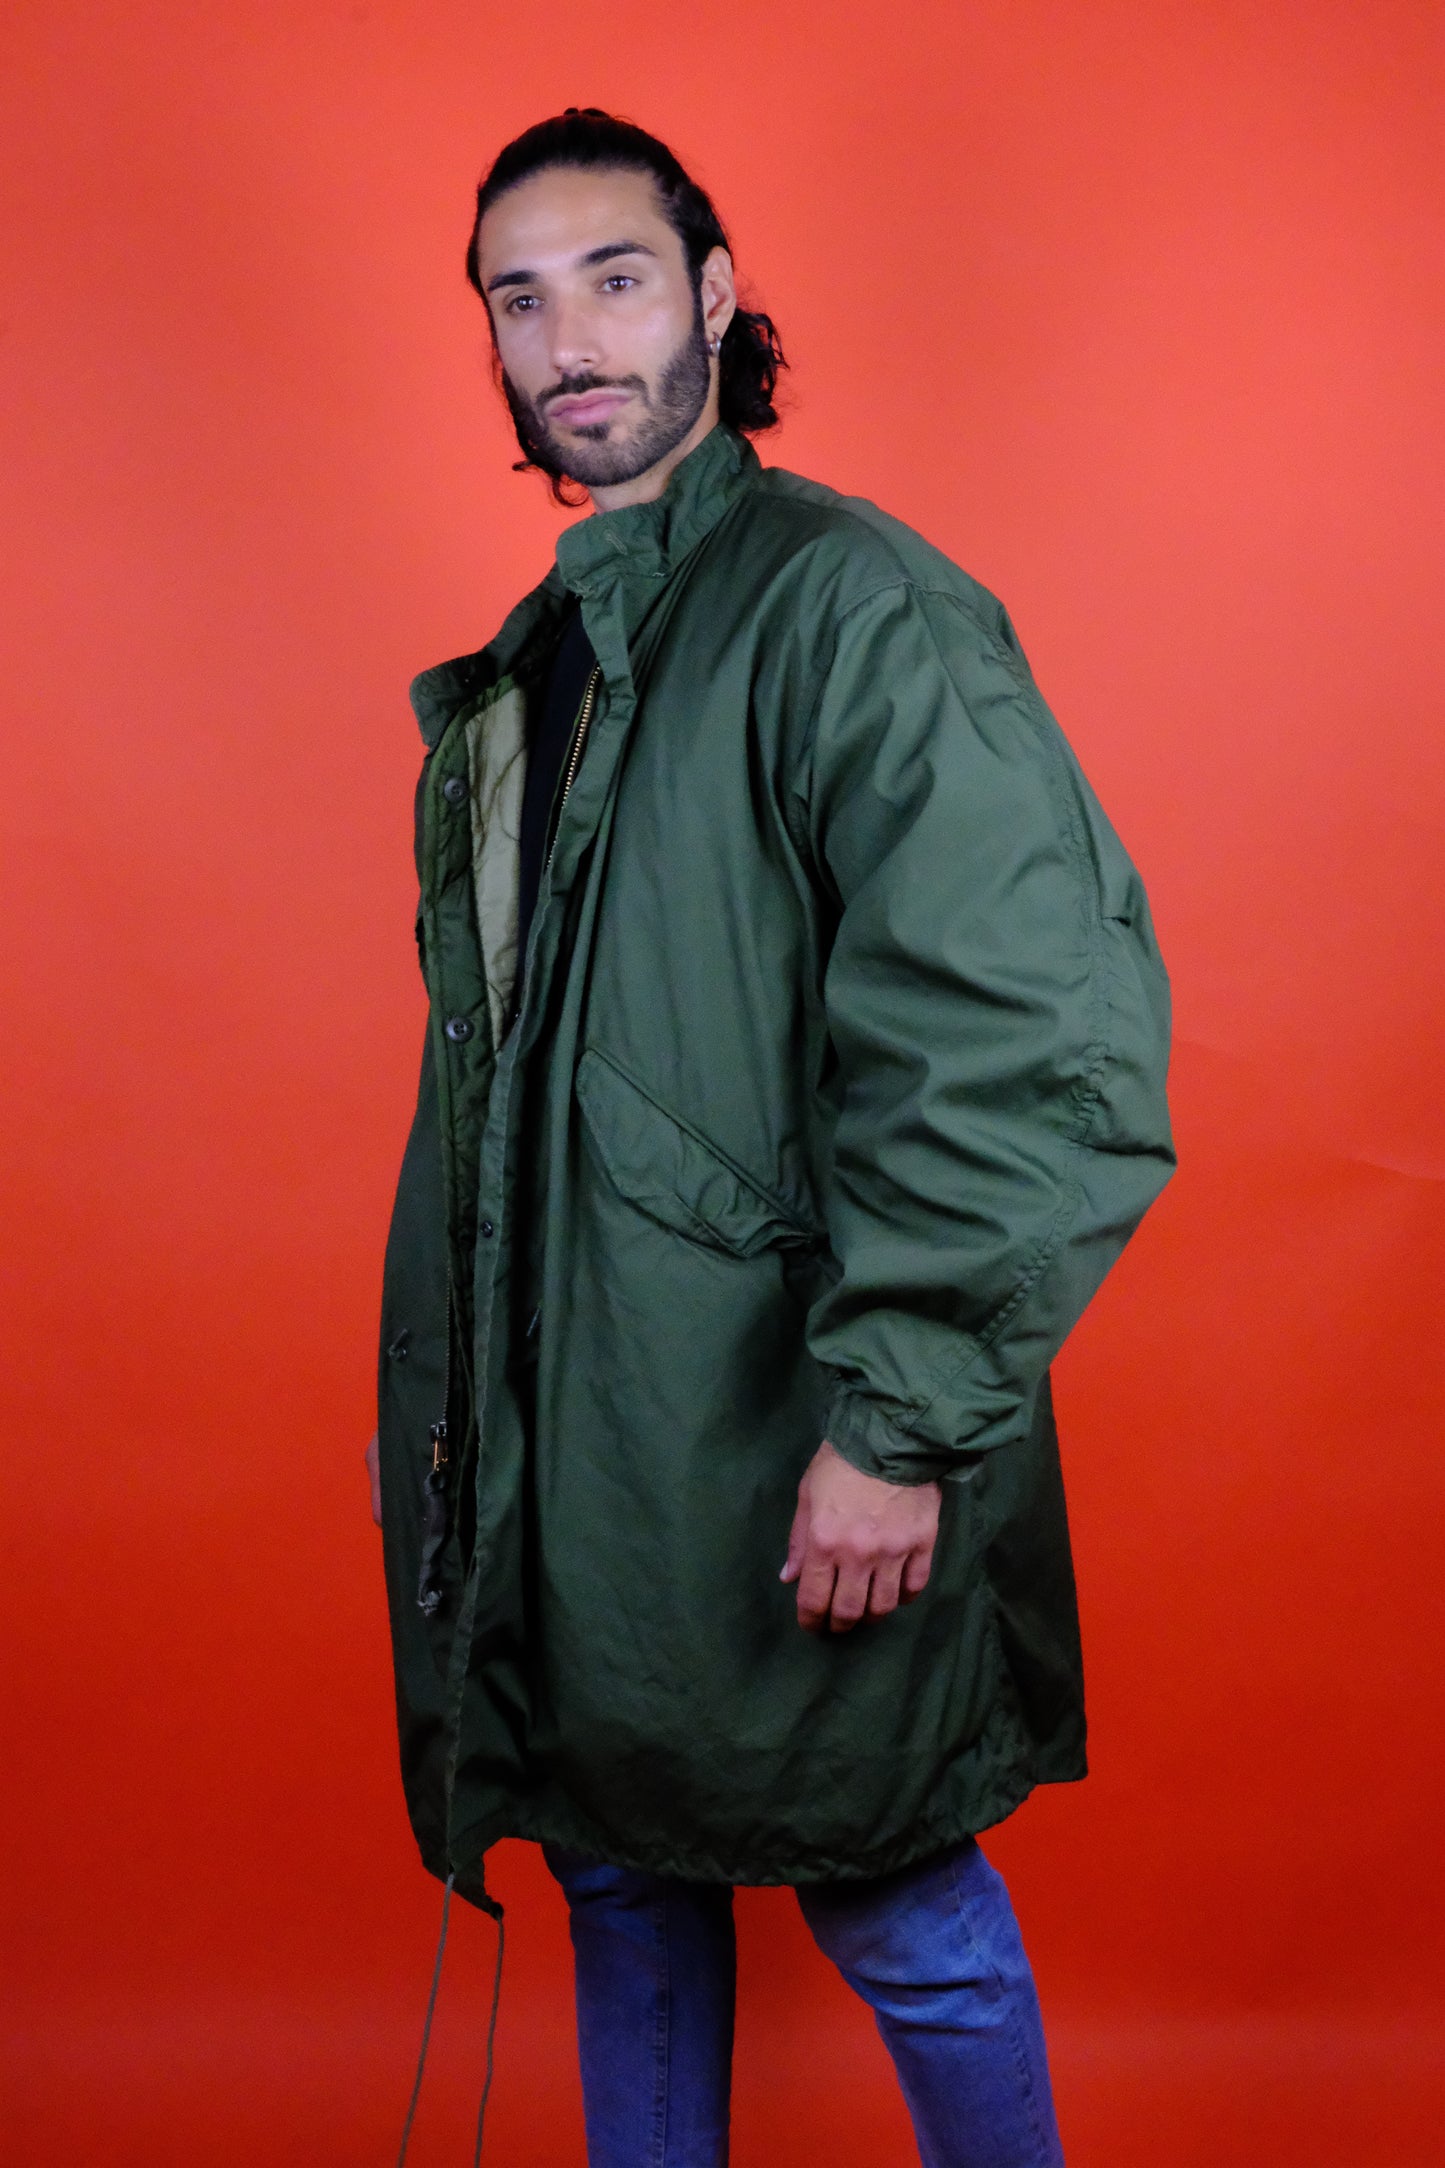 U.S. Army Cold Weather 'Fish Tail' Parka w/ Liner 'XL' - vintage clothing clochard92.com